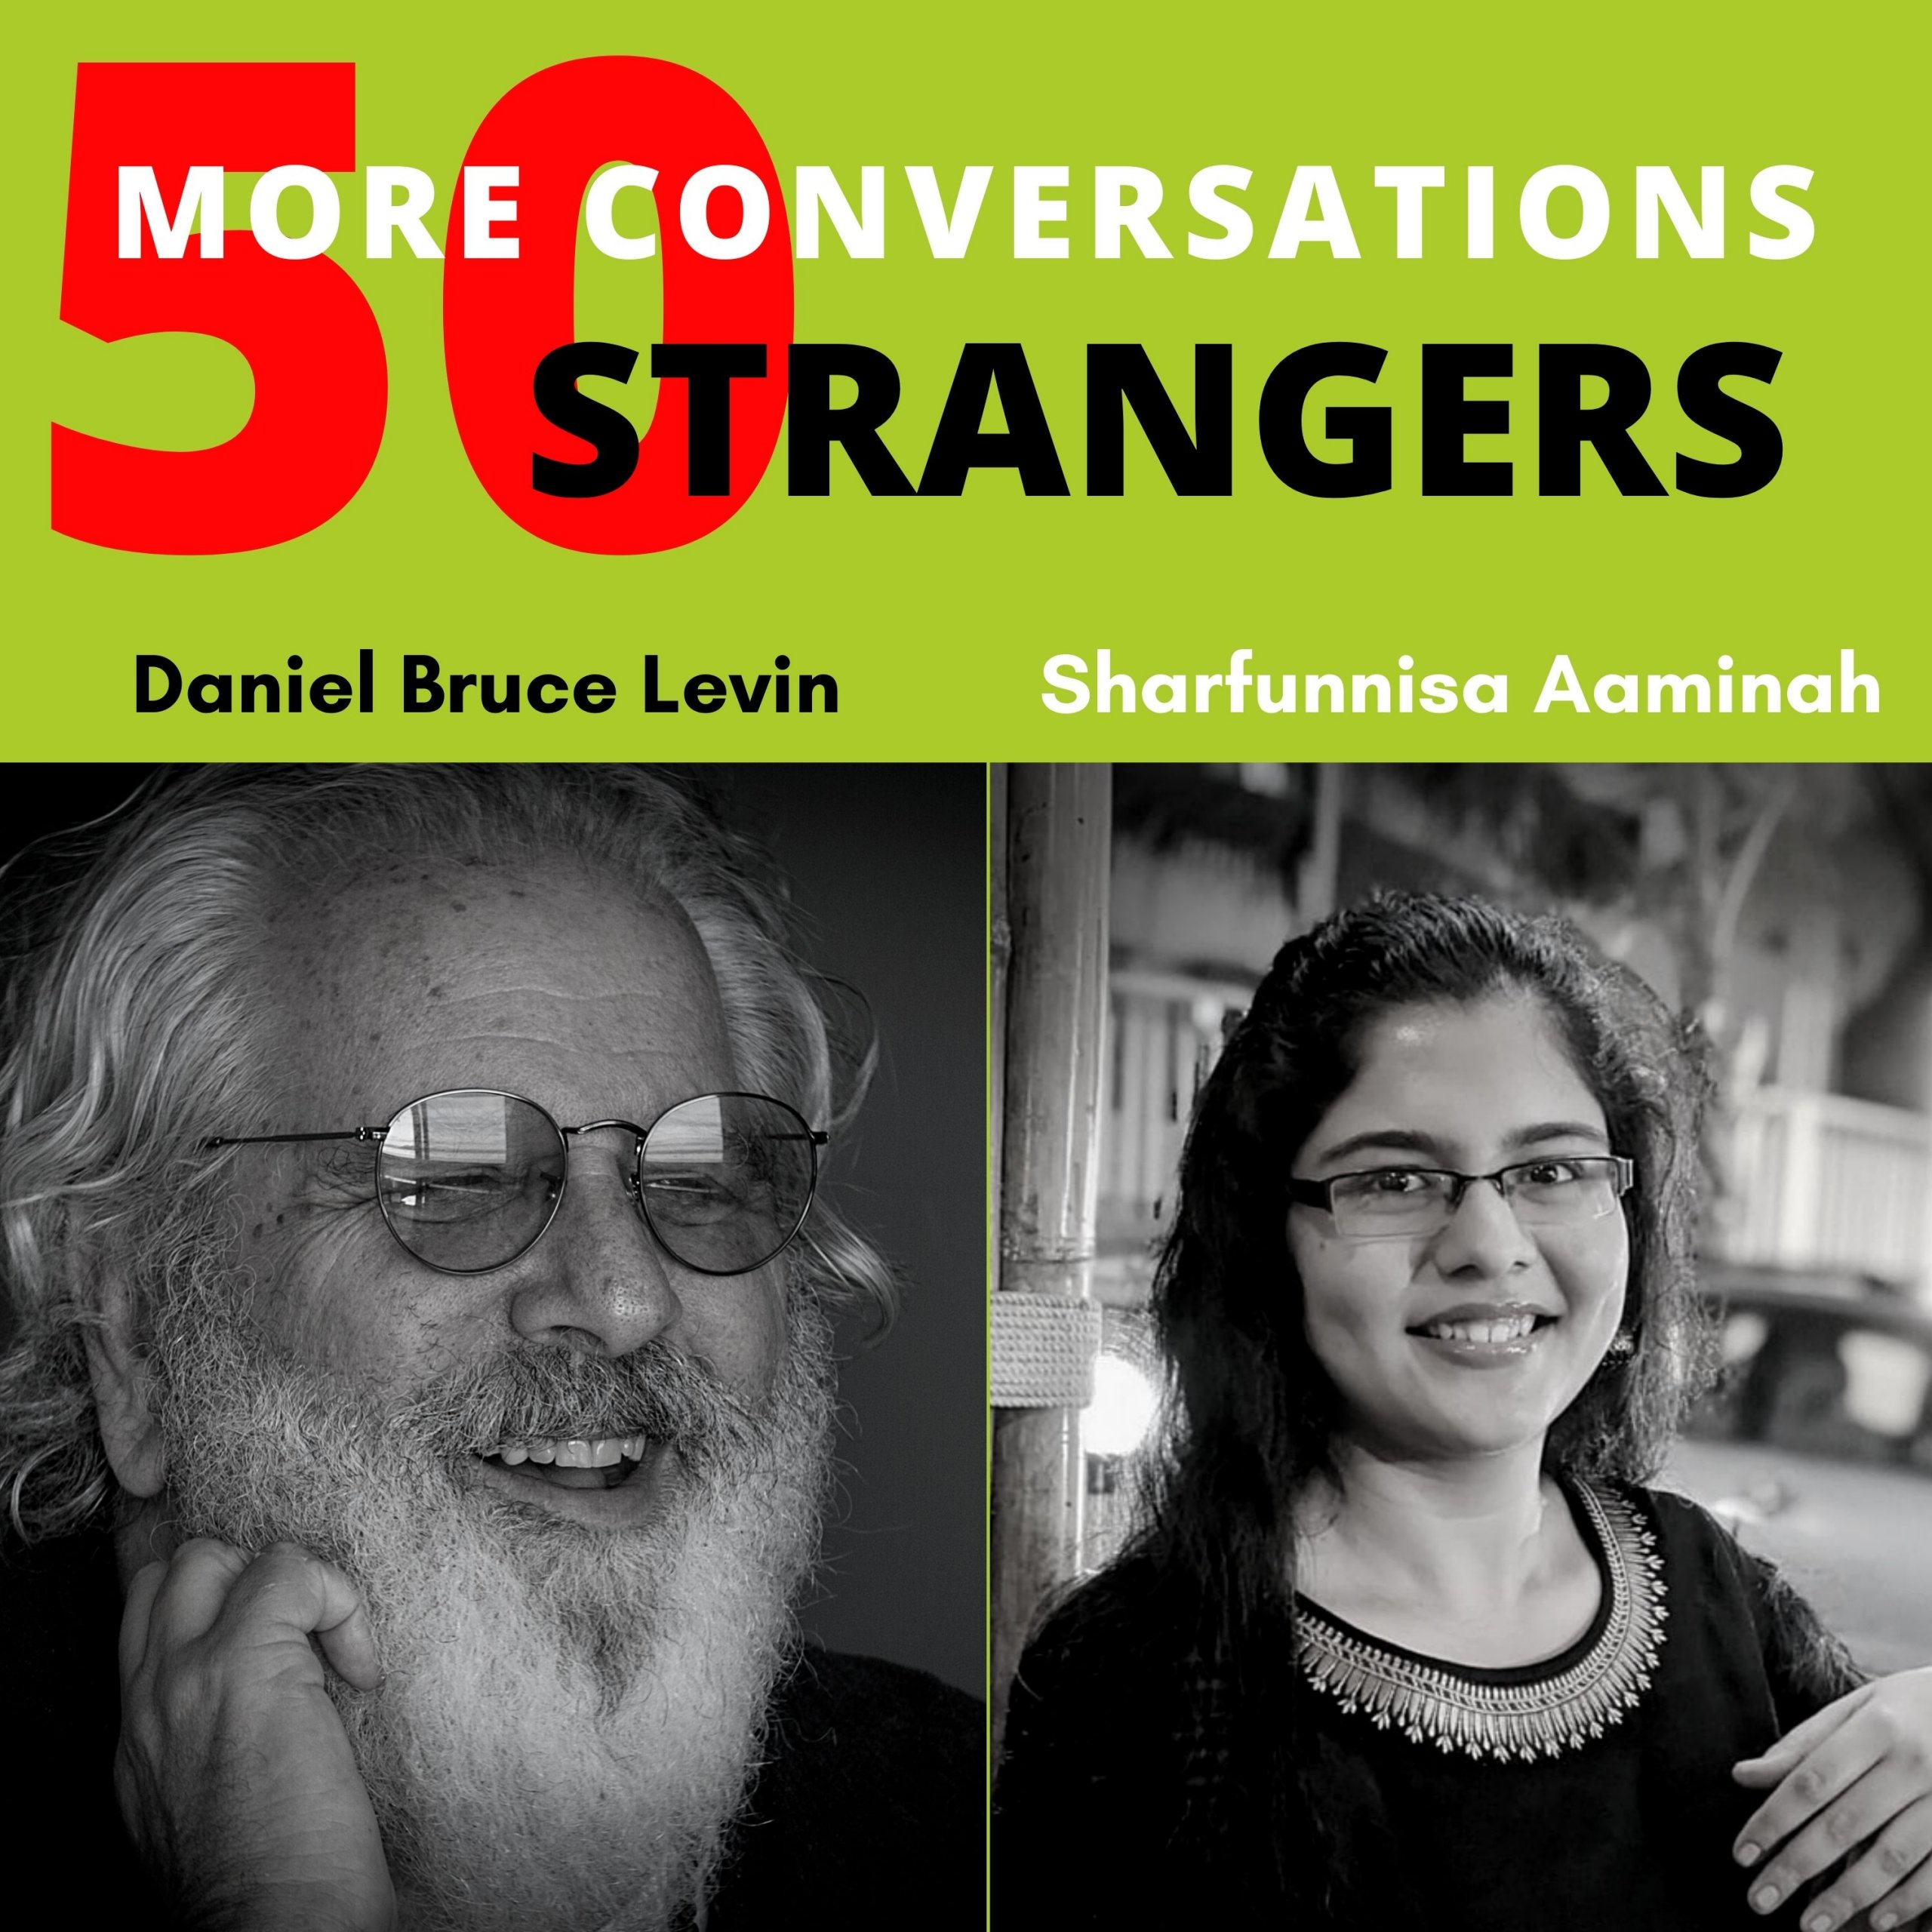 50 More Conversations with 50 More Strangers with Sharfunnisa Aaminah